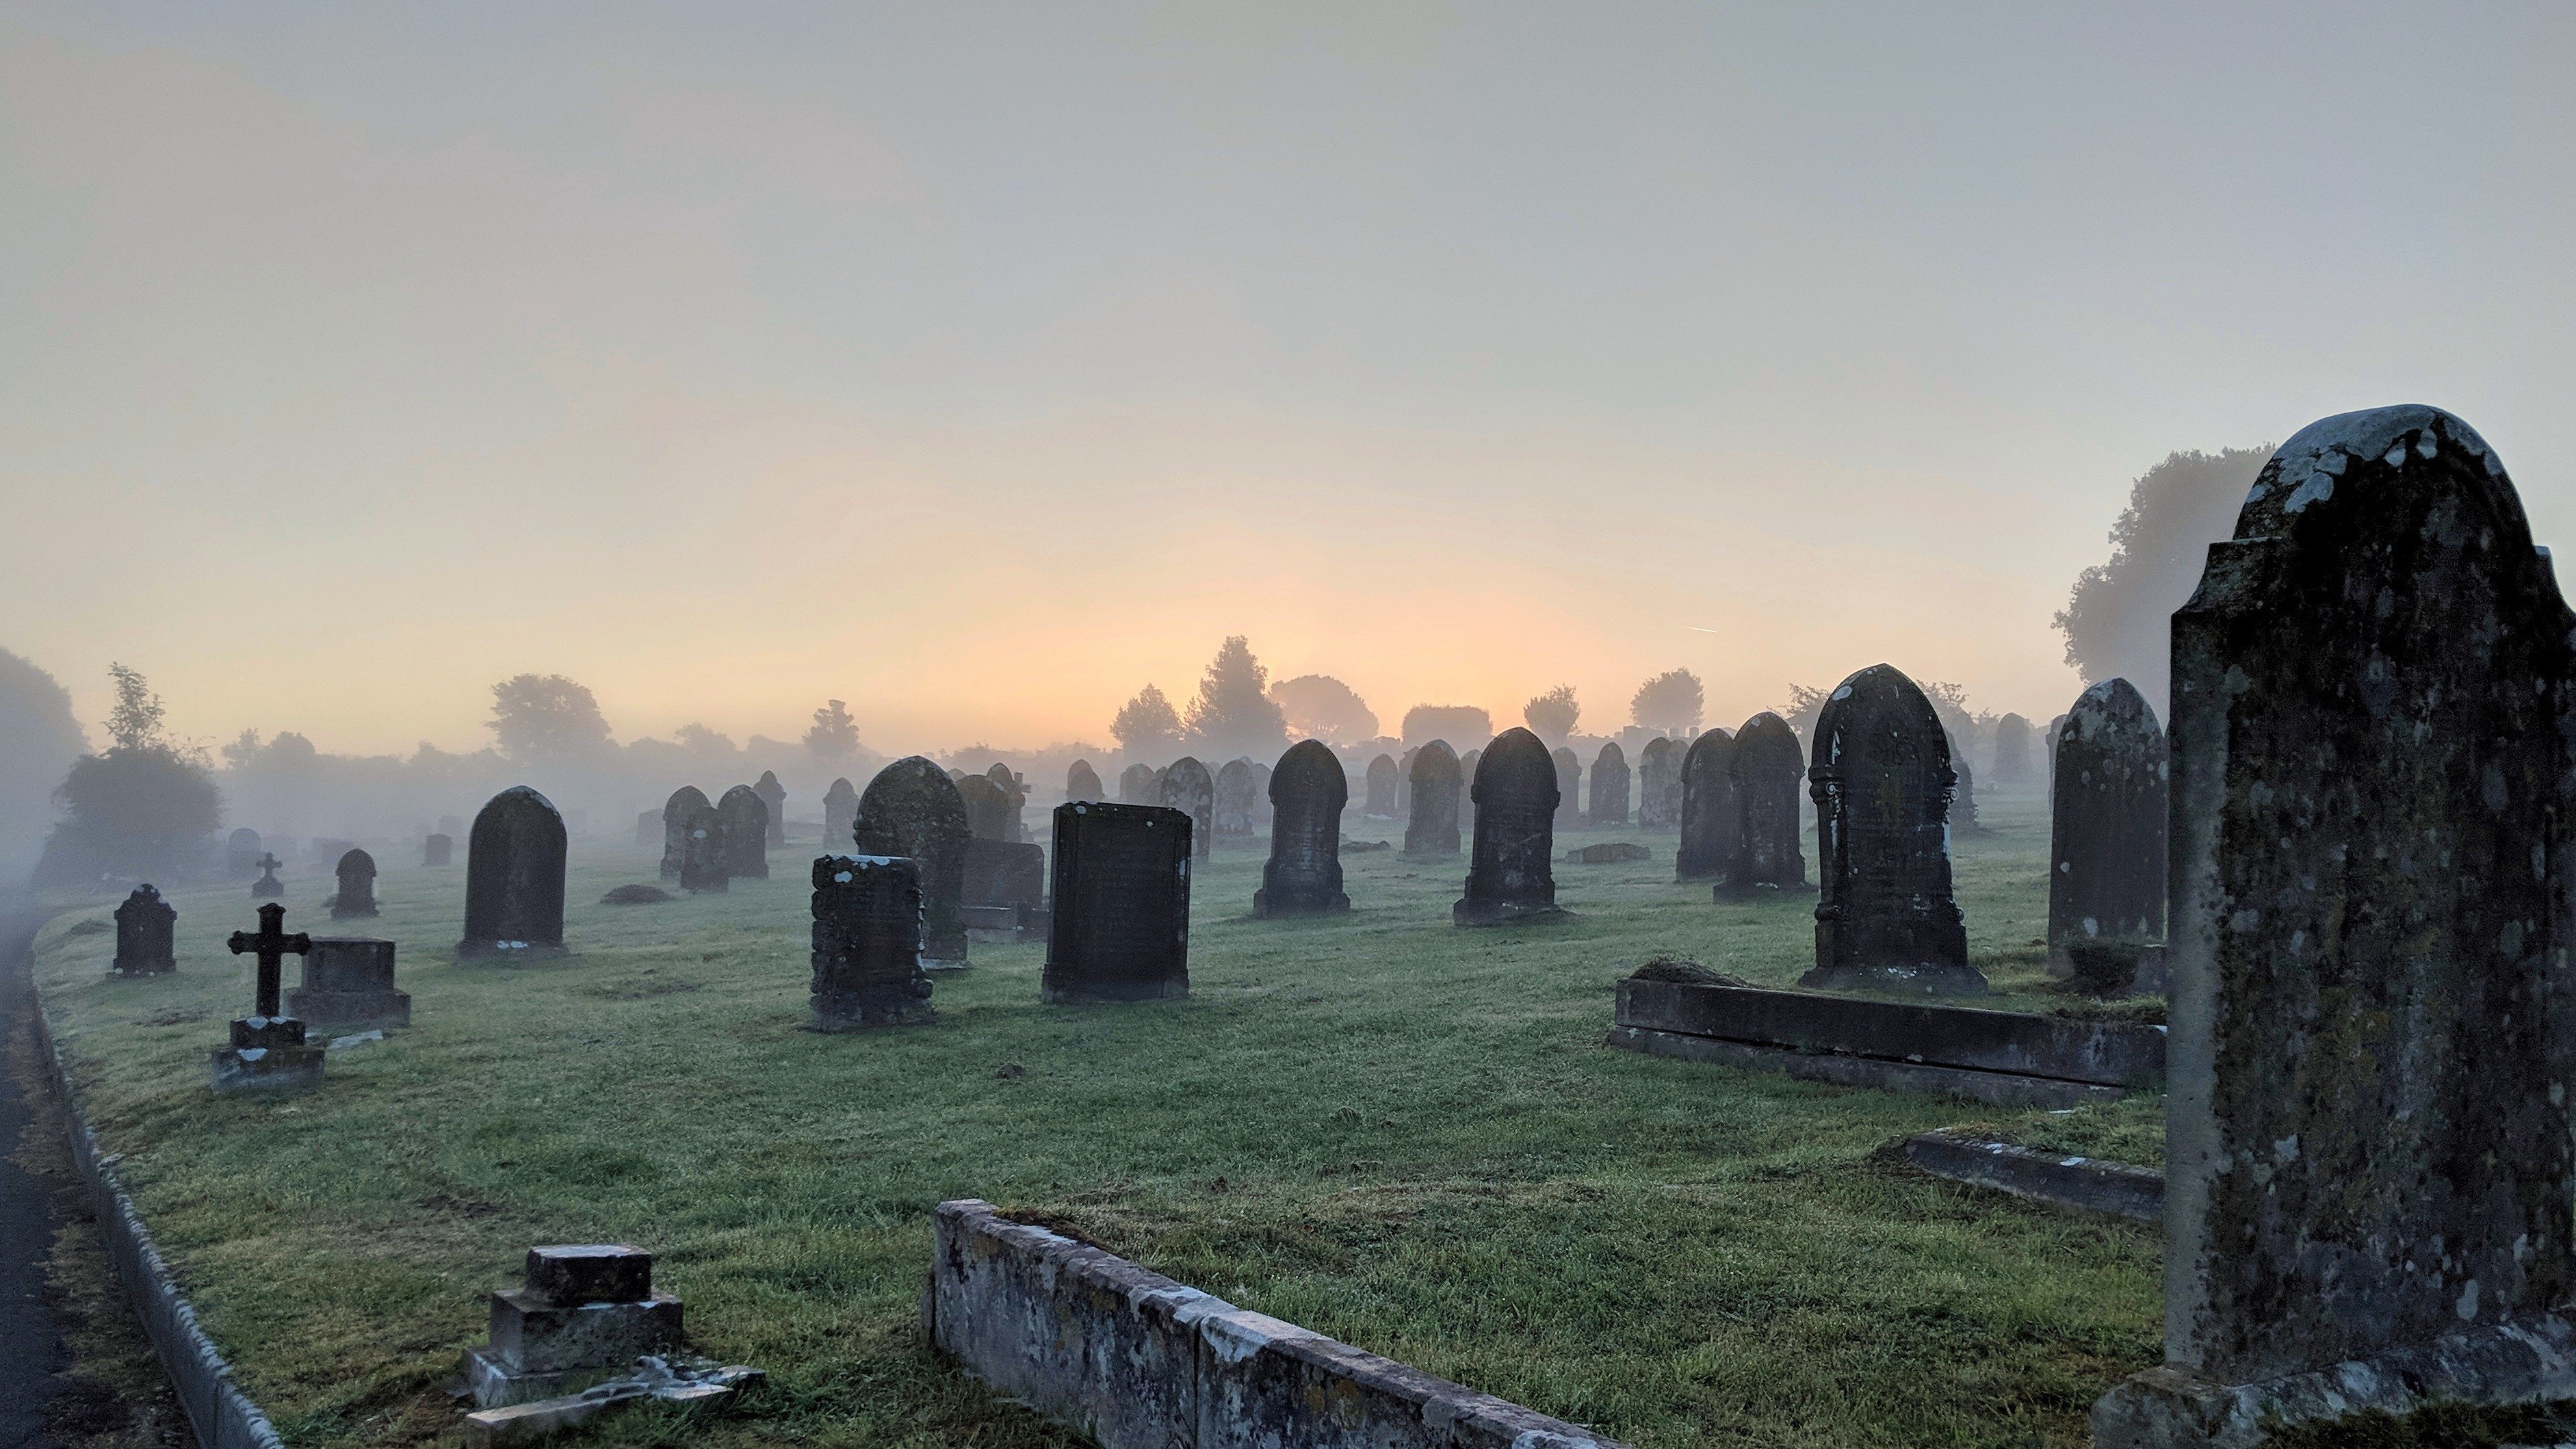 Photo of a misty graveyard at dawn with the first glimpse of sunlight on the horizon